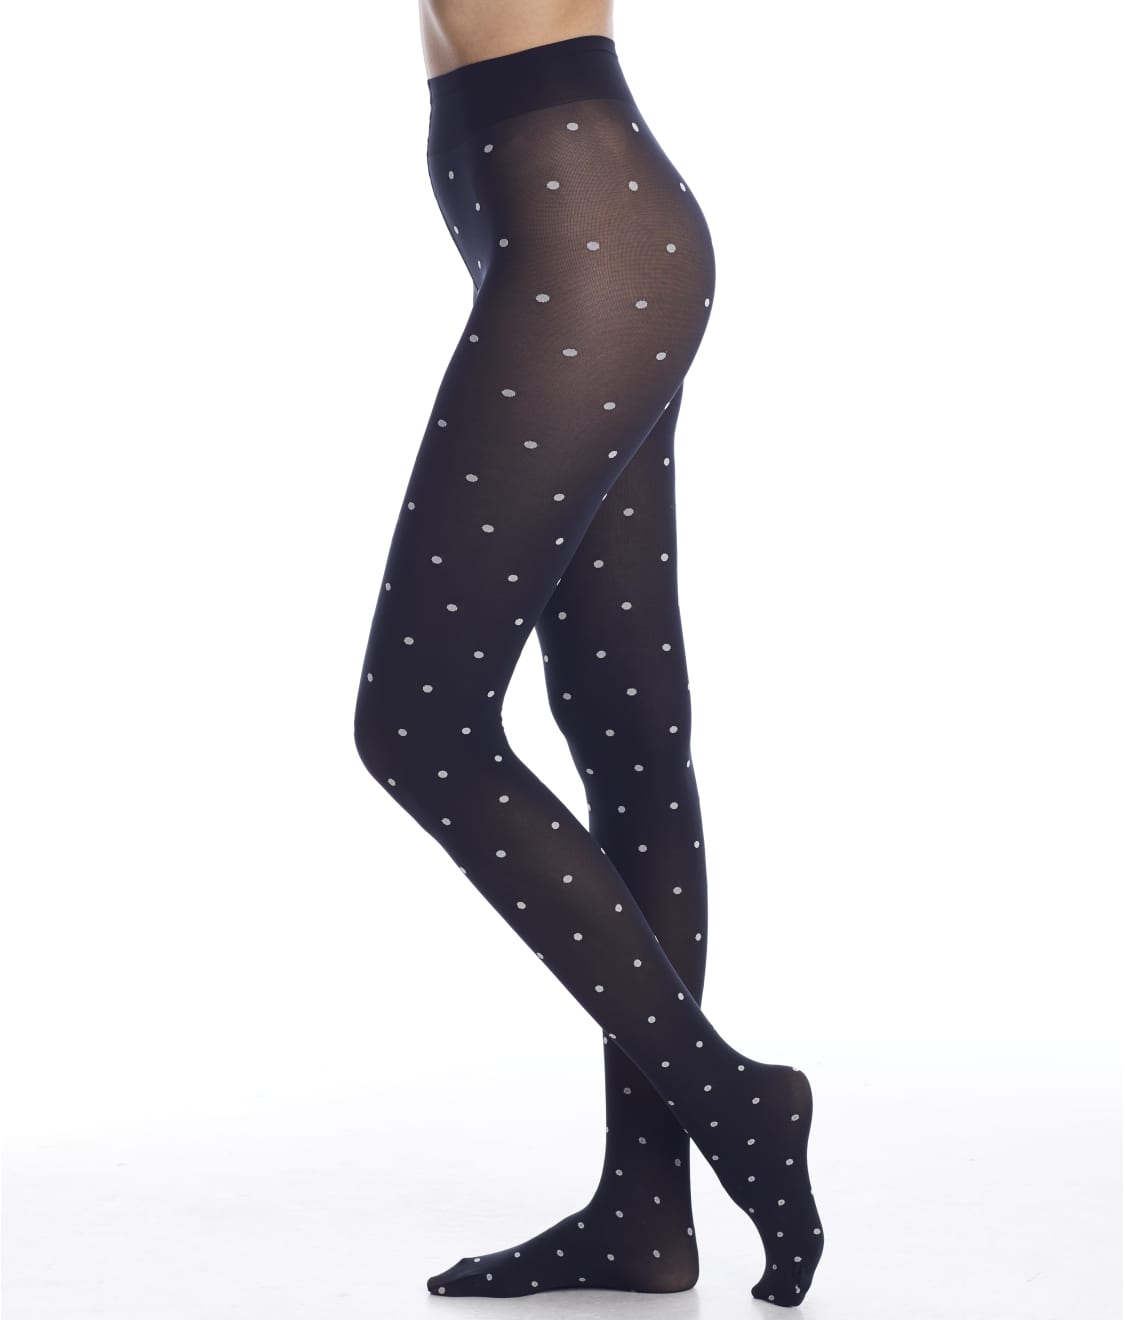 Oroblu Color Dot Tights & Reviews | Bare Necessities (Style VOBC66415)